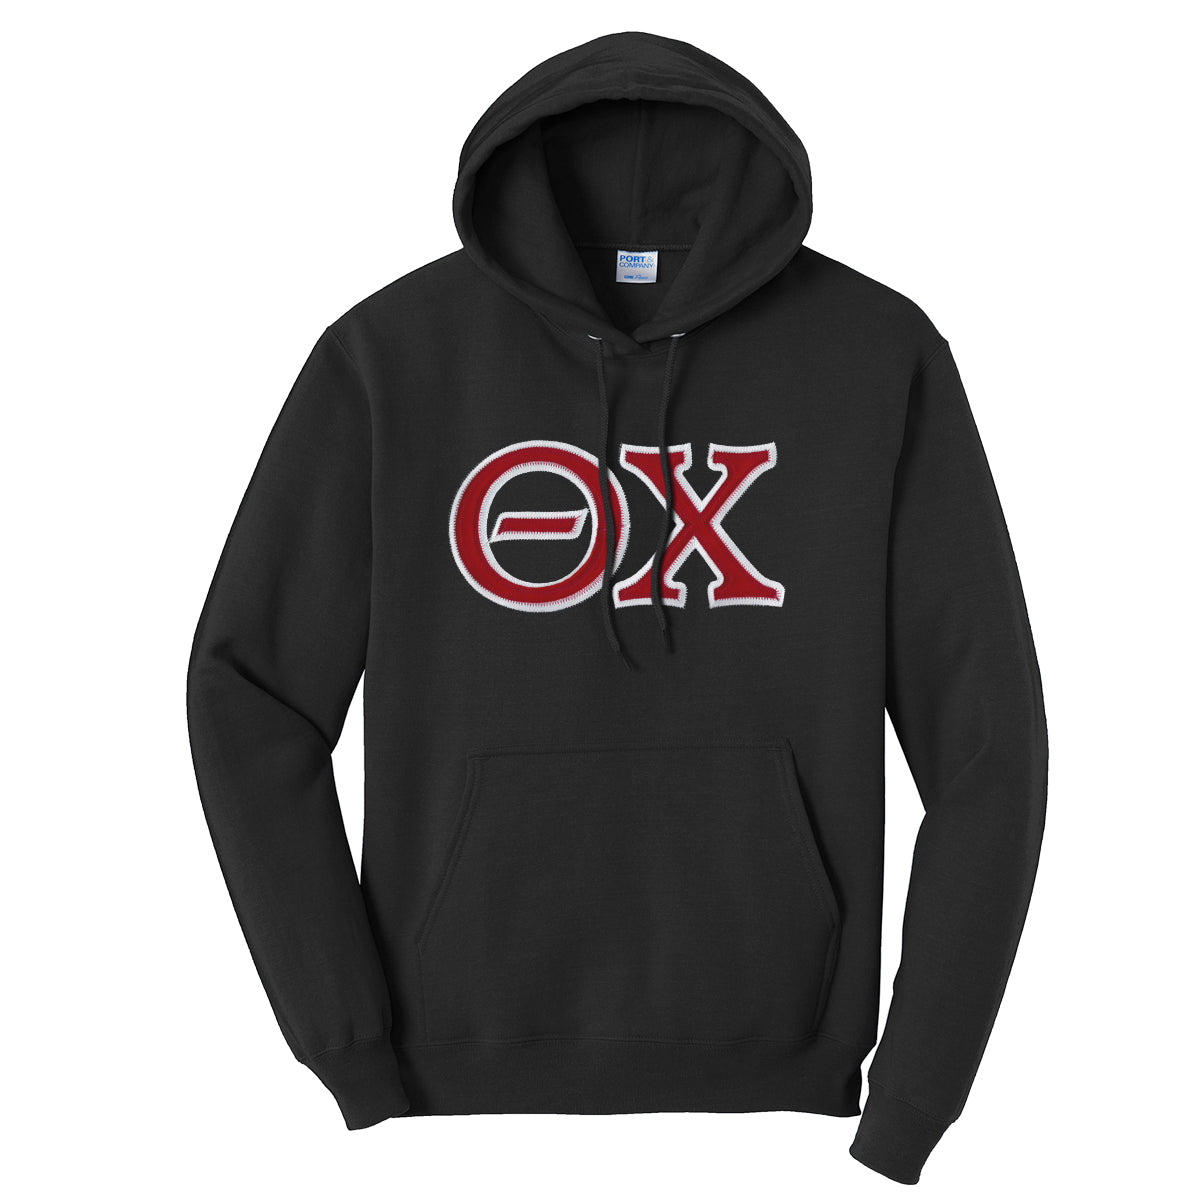 Theta Chi Black Hoodie with Sewn On Greek Letters